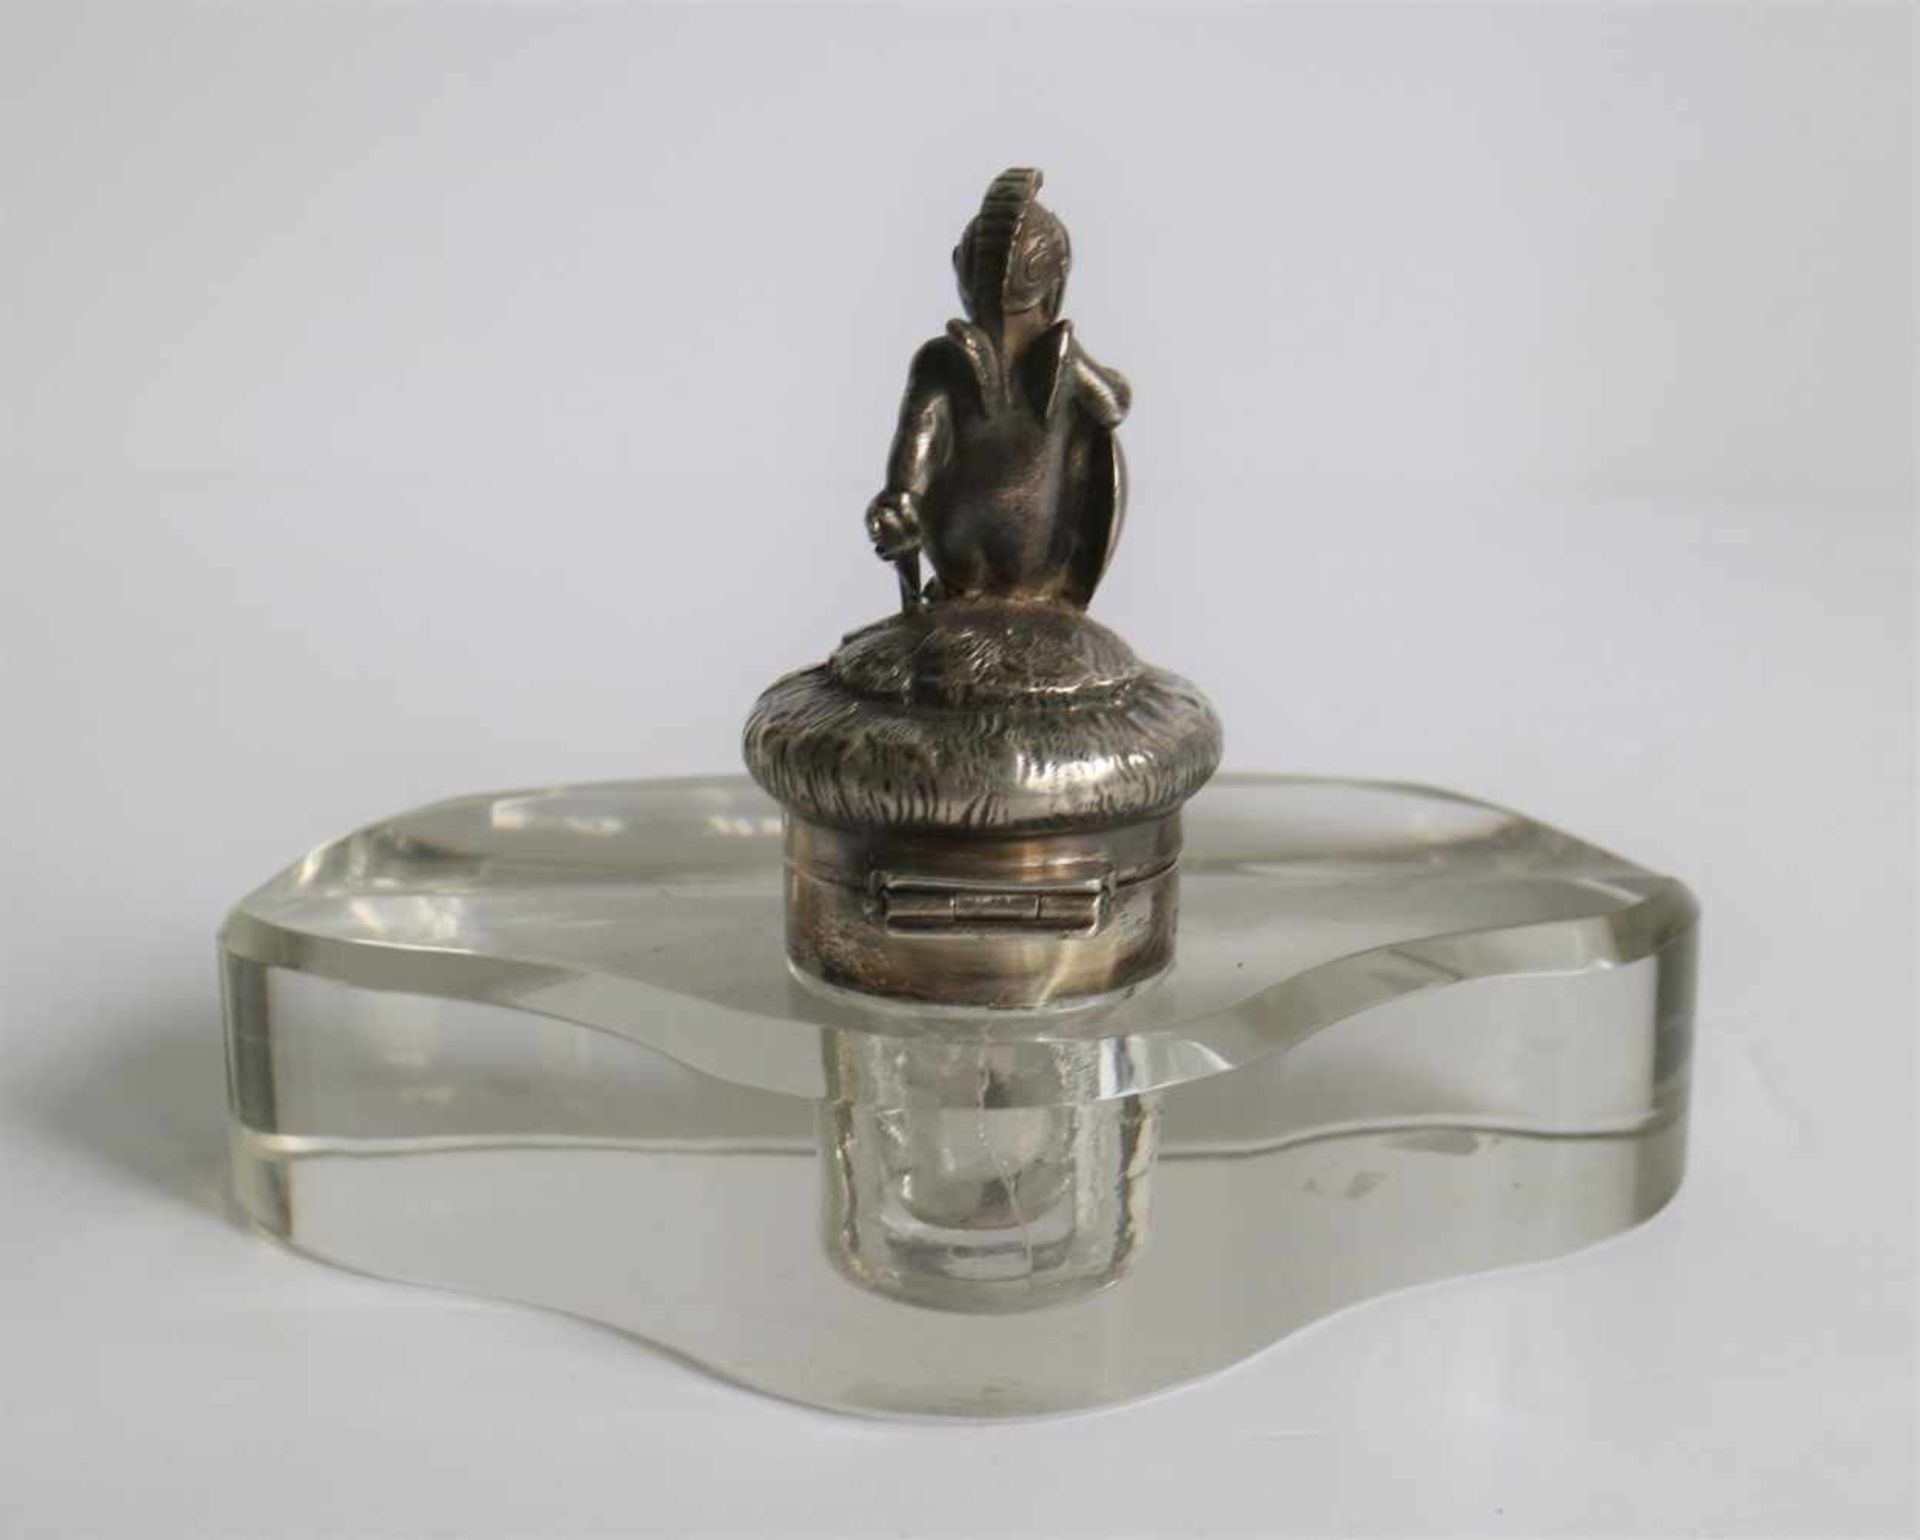 2 silver inkwells Both inkwells with mark (s), France H 9,5 en 10 cm - Image 2 of 10